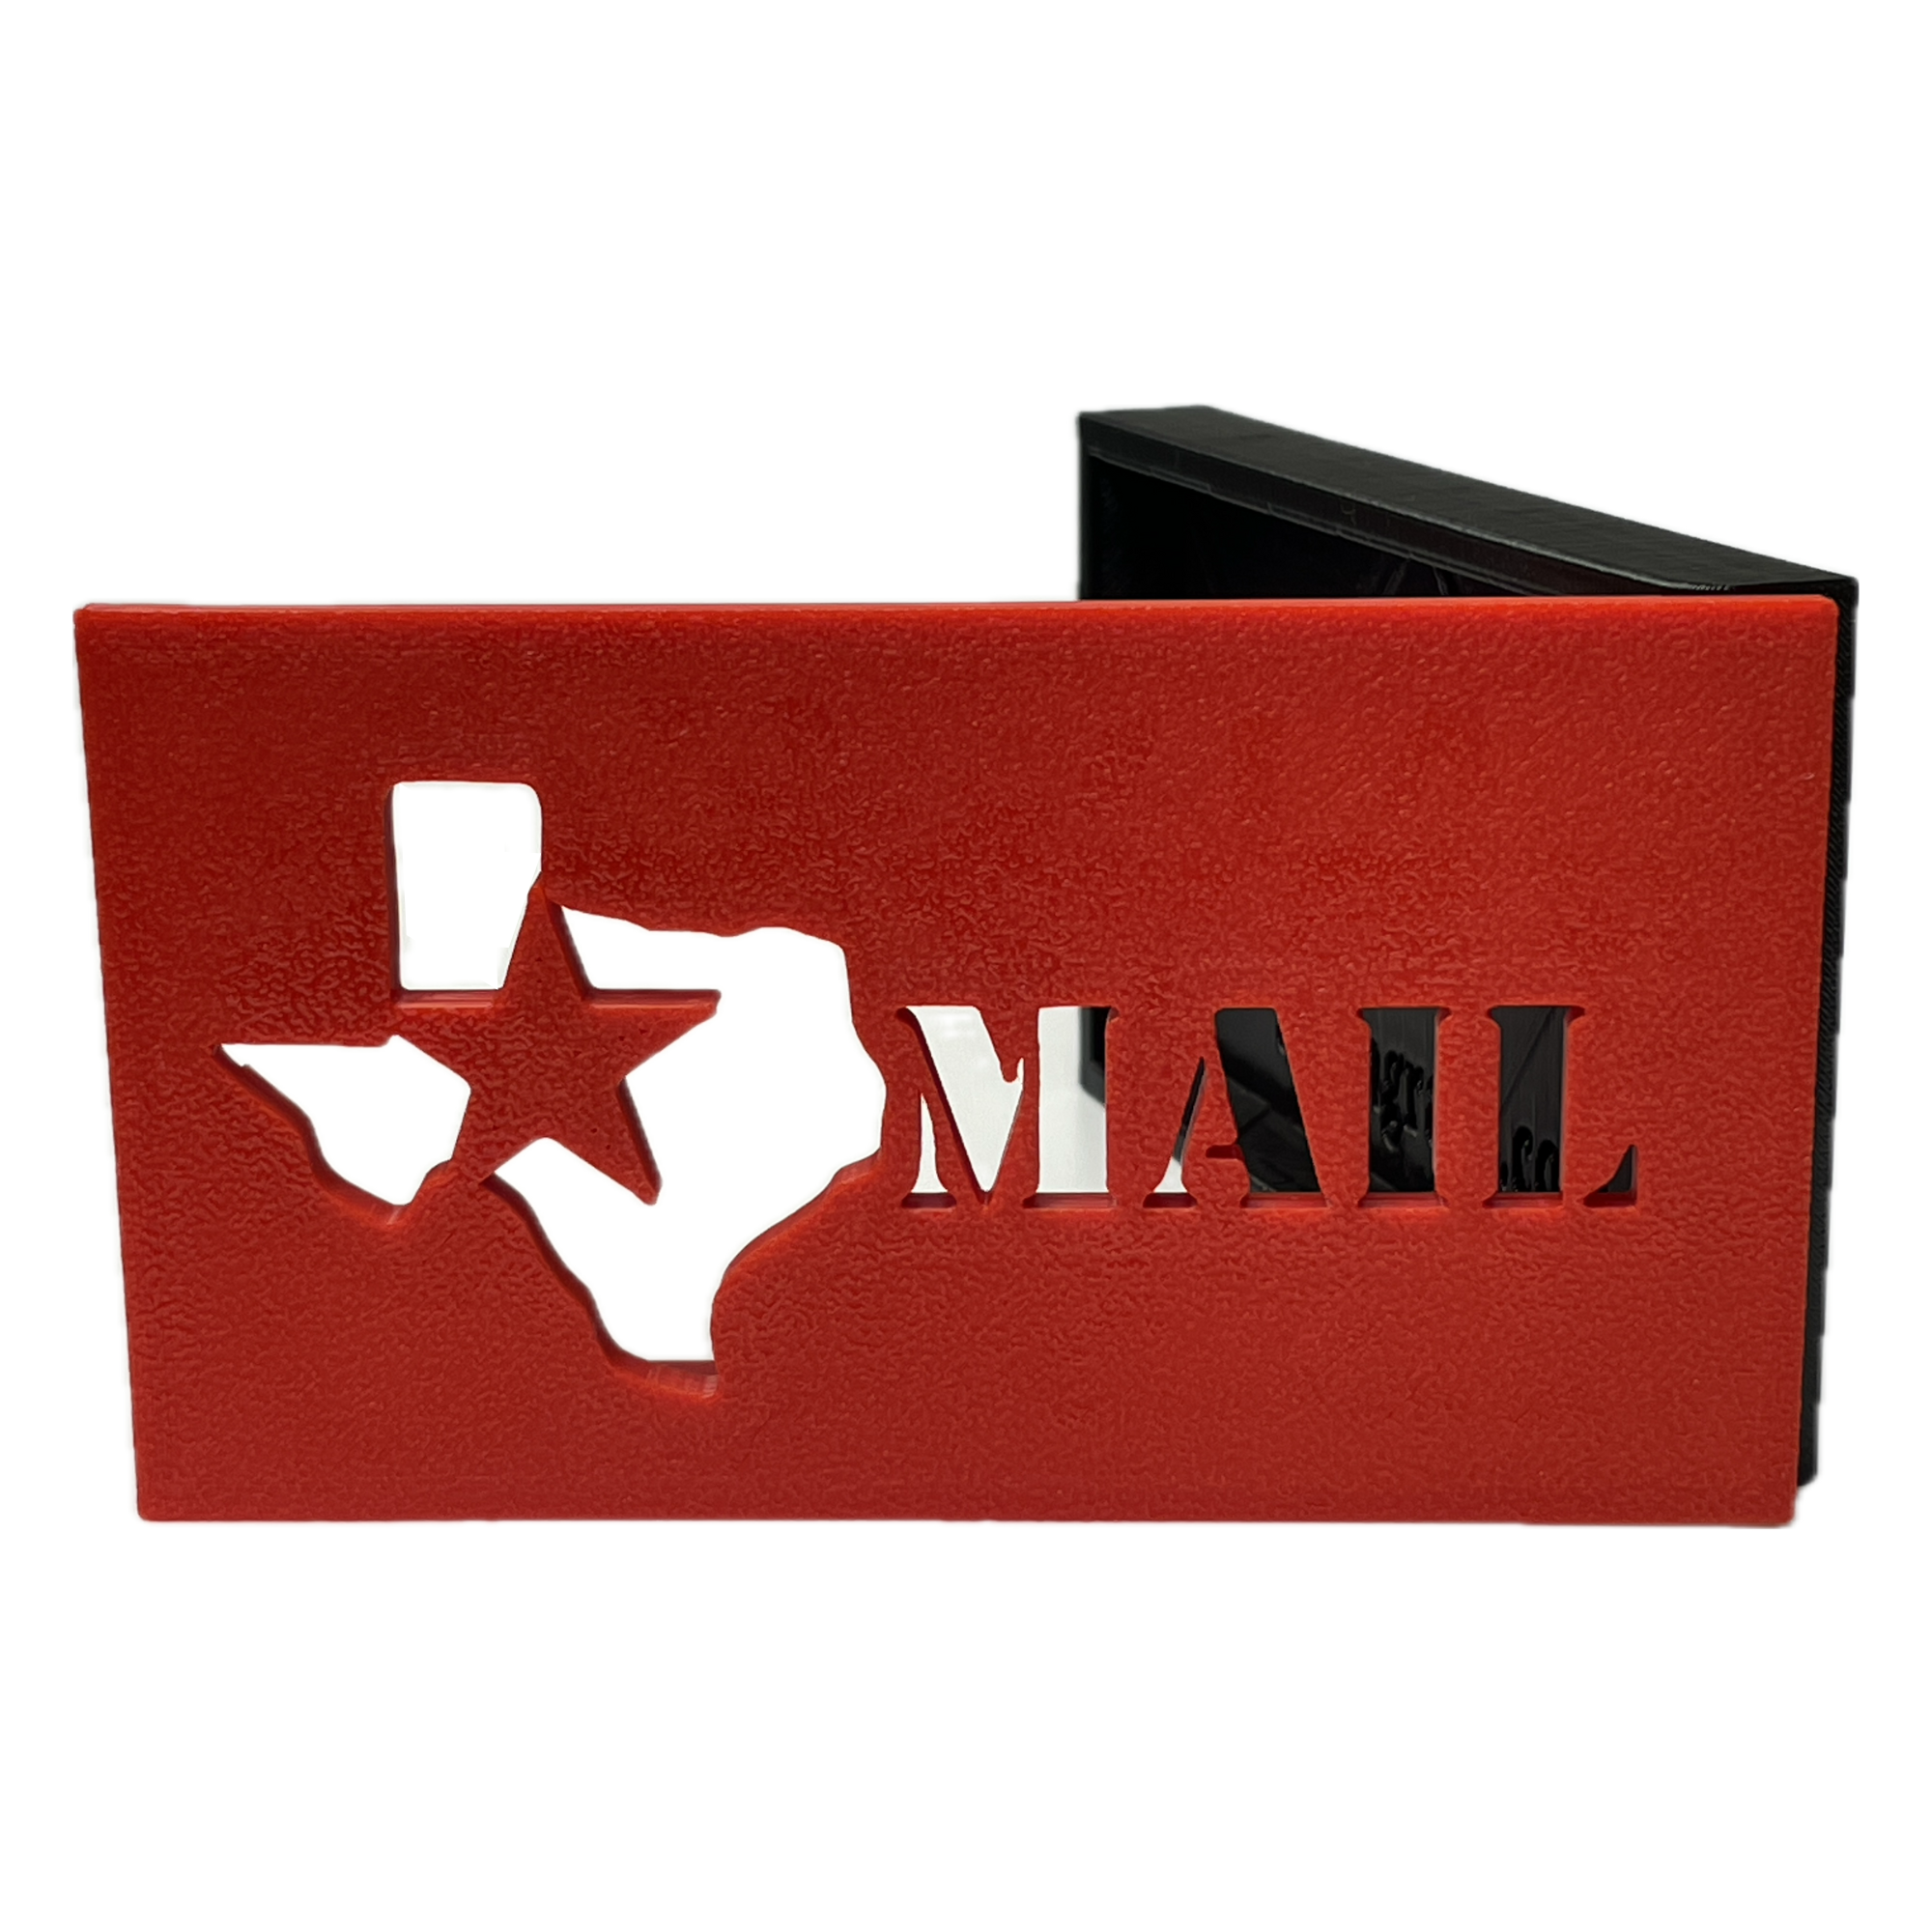 Texas Star mailbox flag for brick or stone mailboxes product picture on a white background.